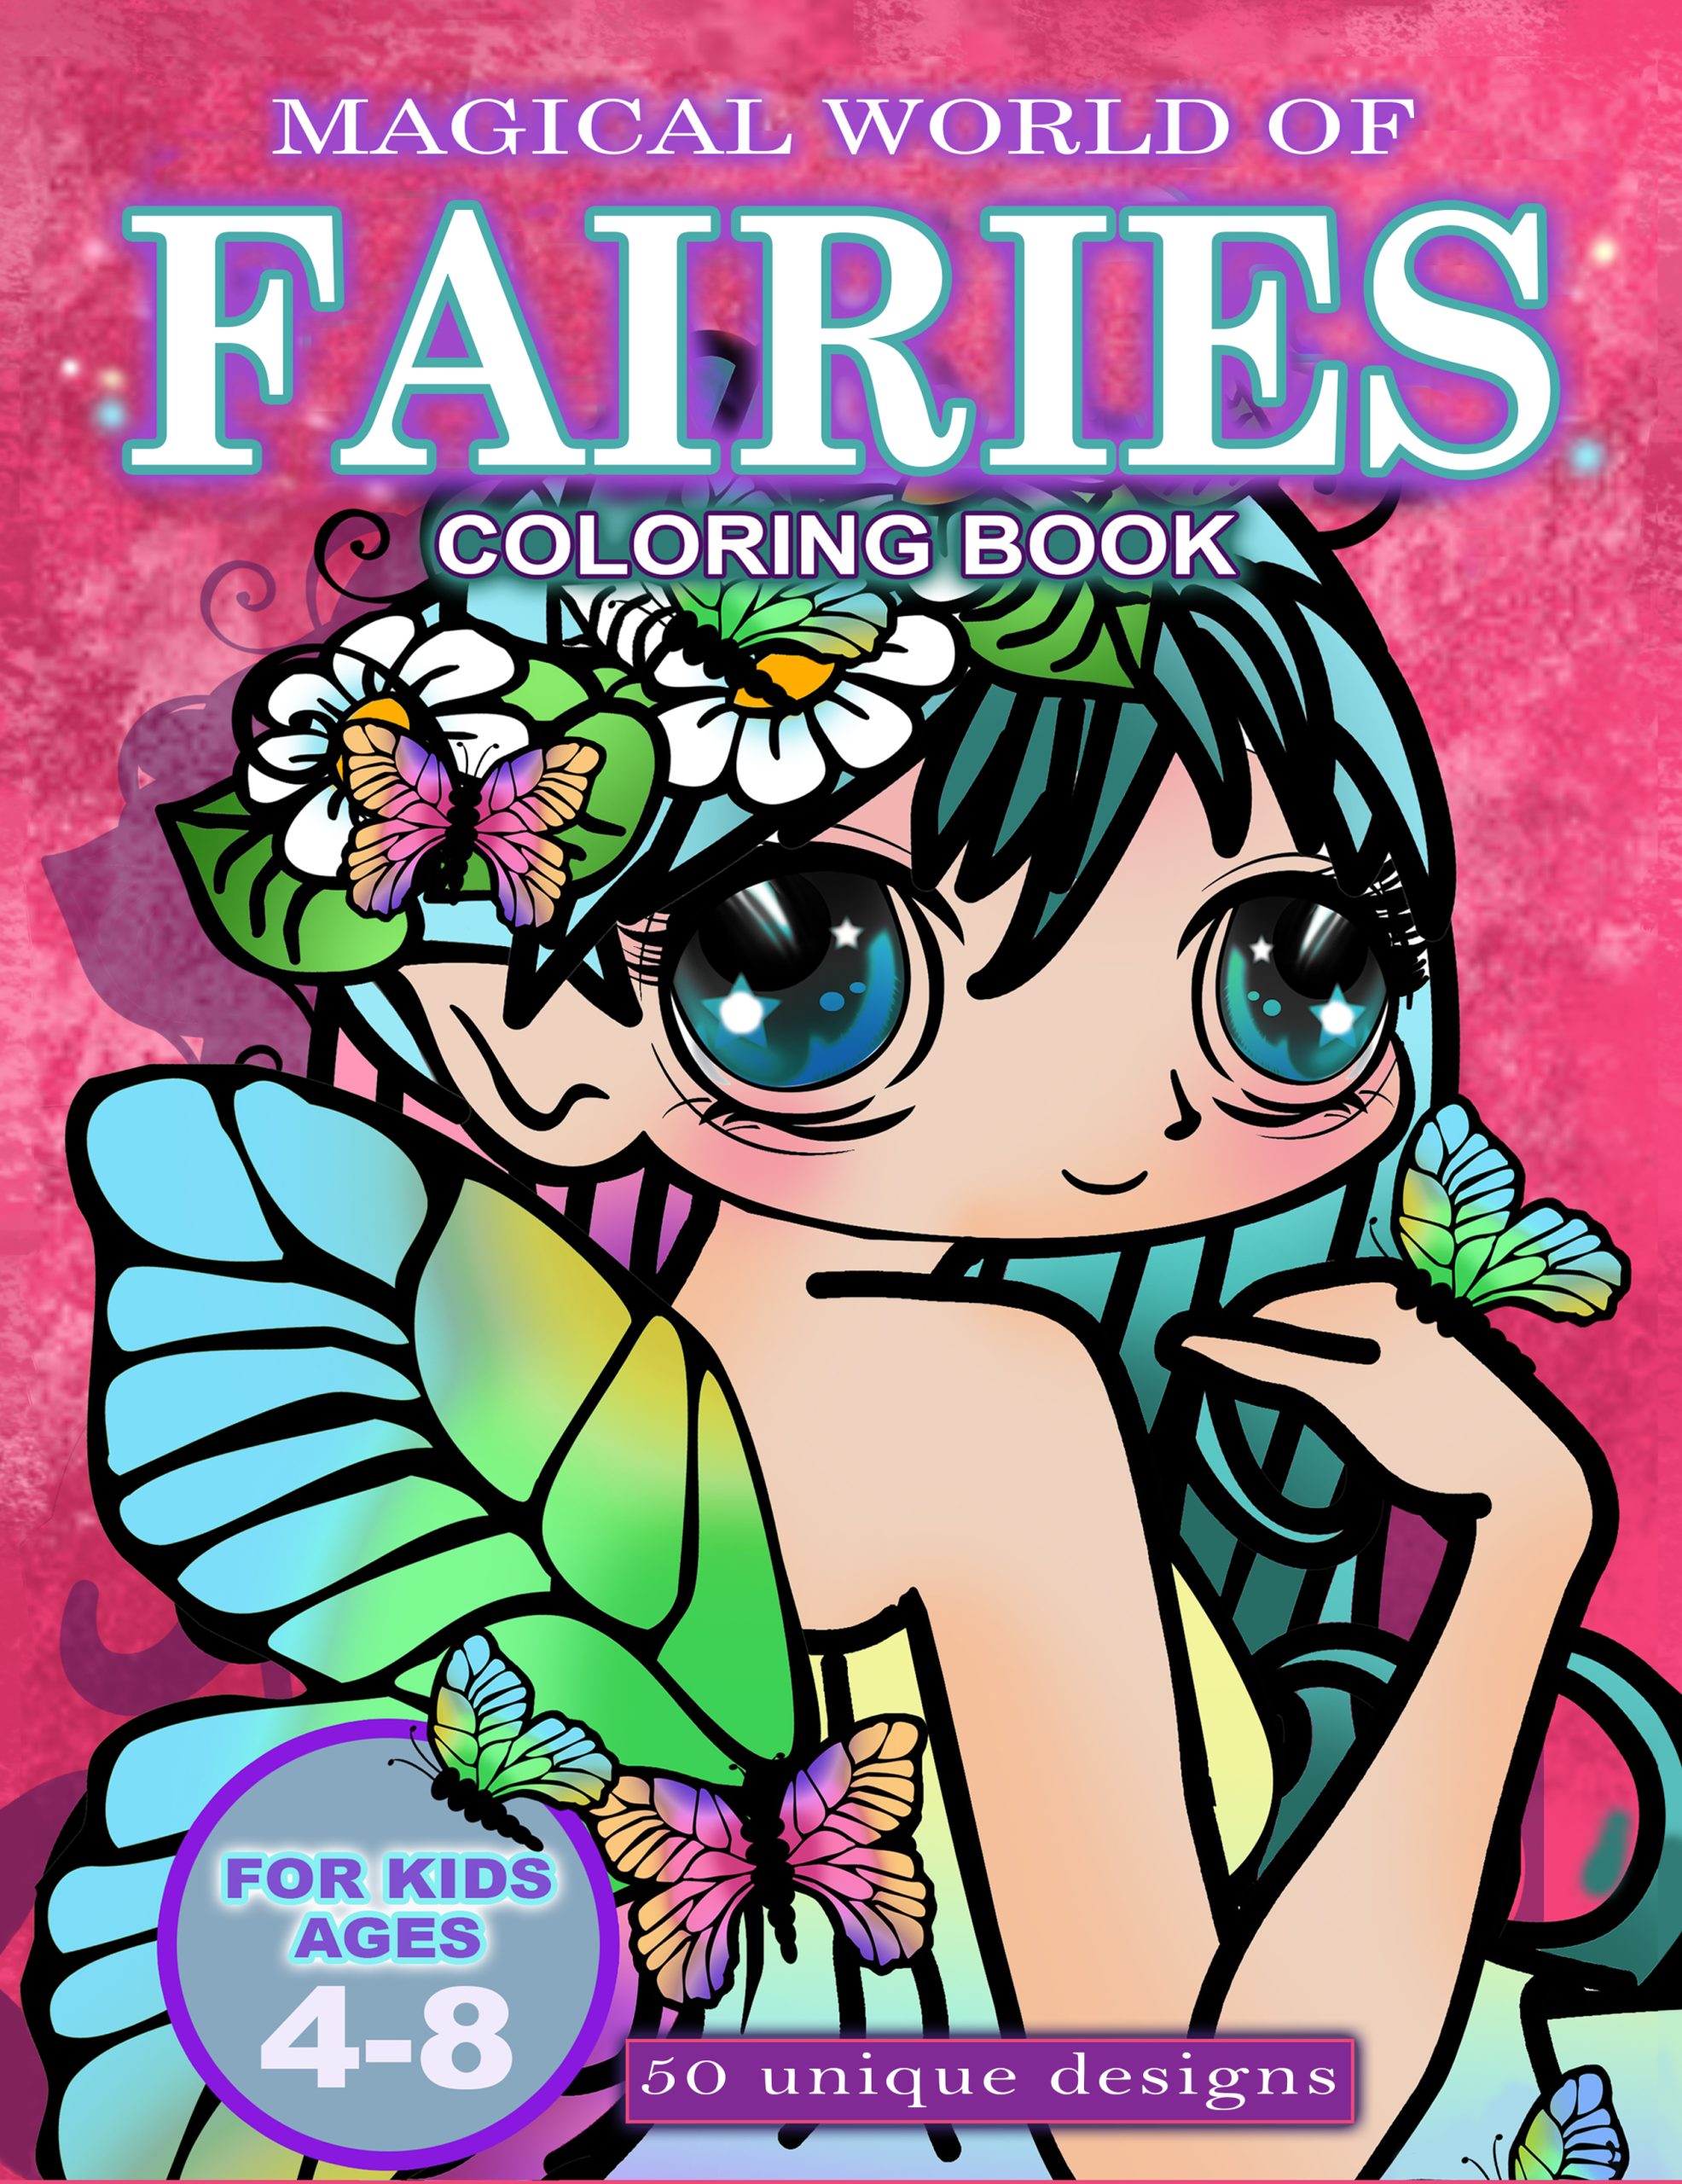 The Magical World Of Fairies coloring book for kids and girls ages 4-8 years old